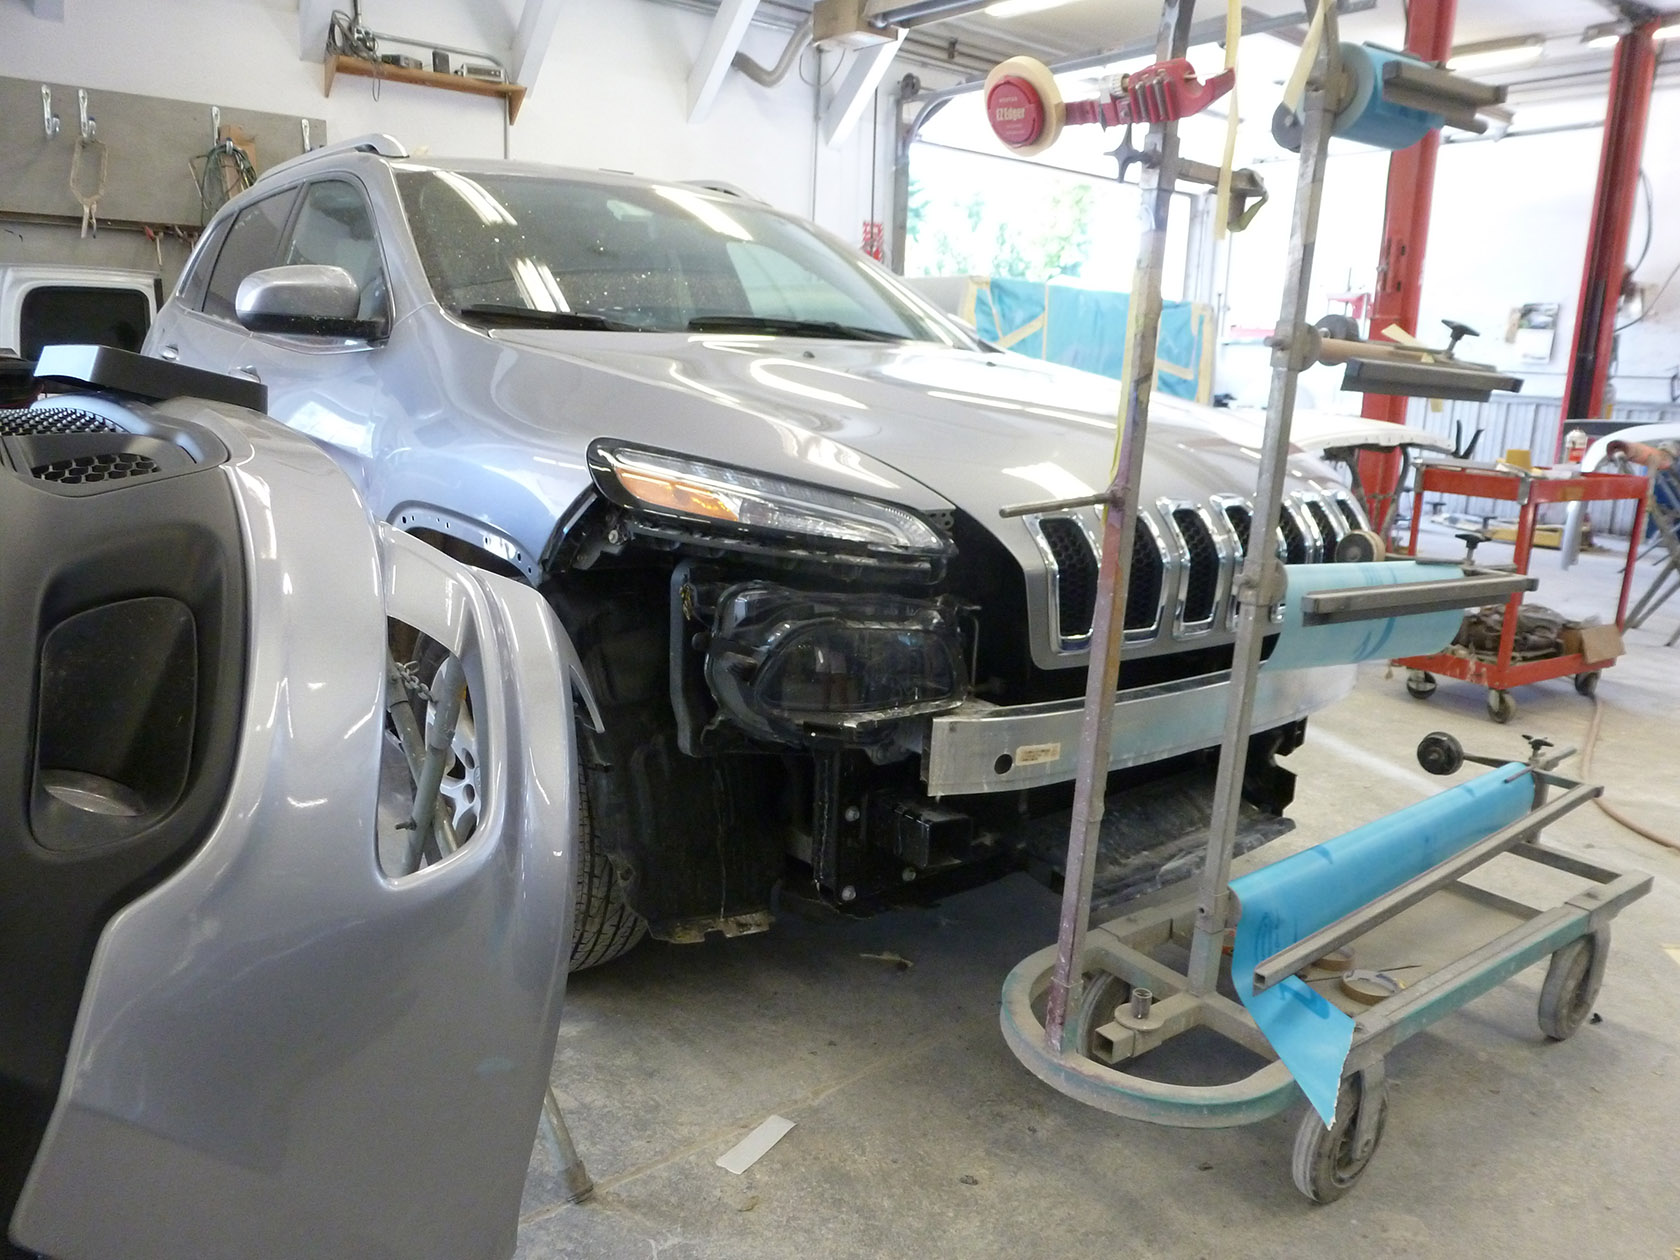 photo of car being repaired